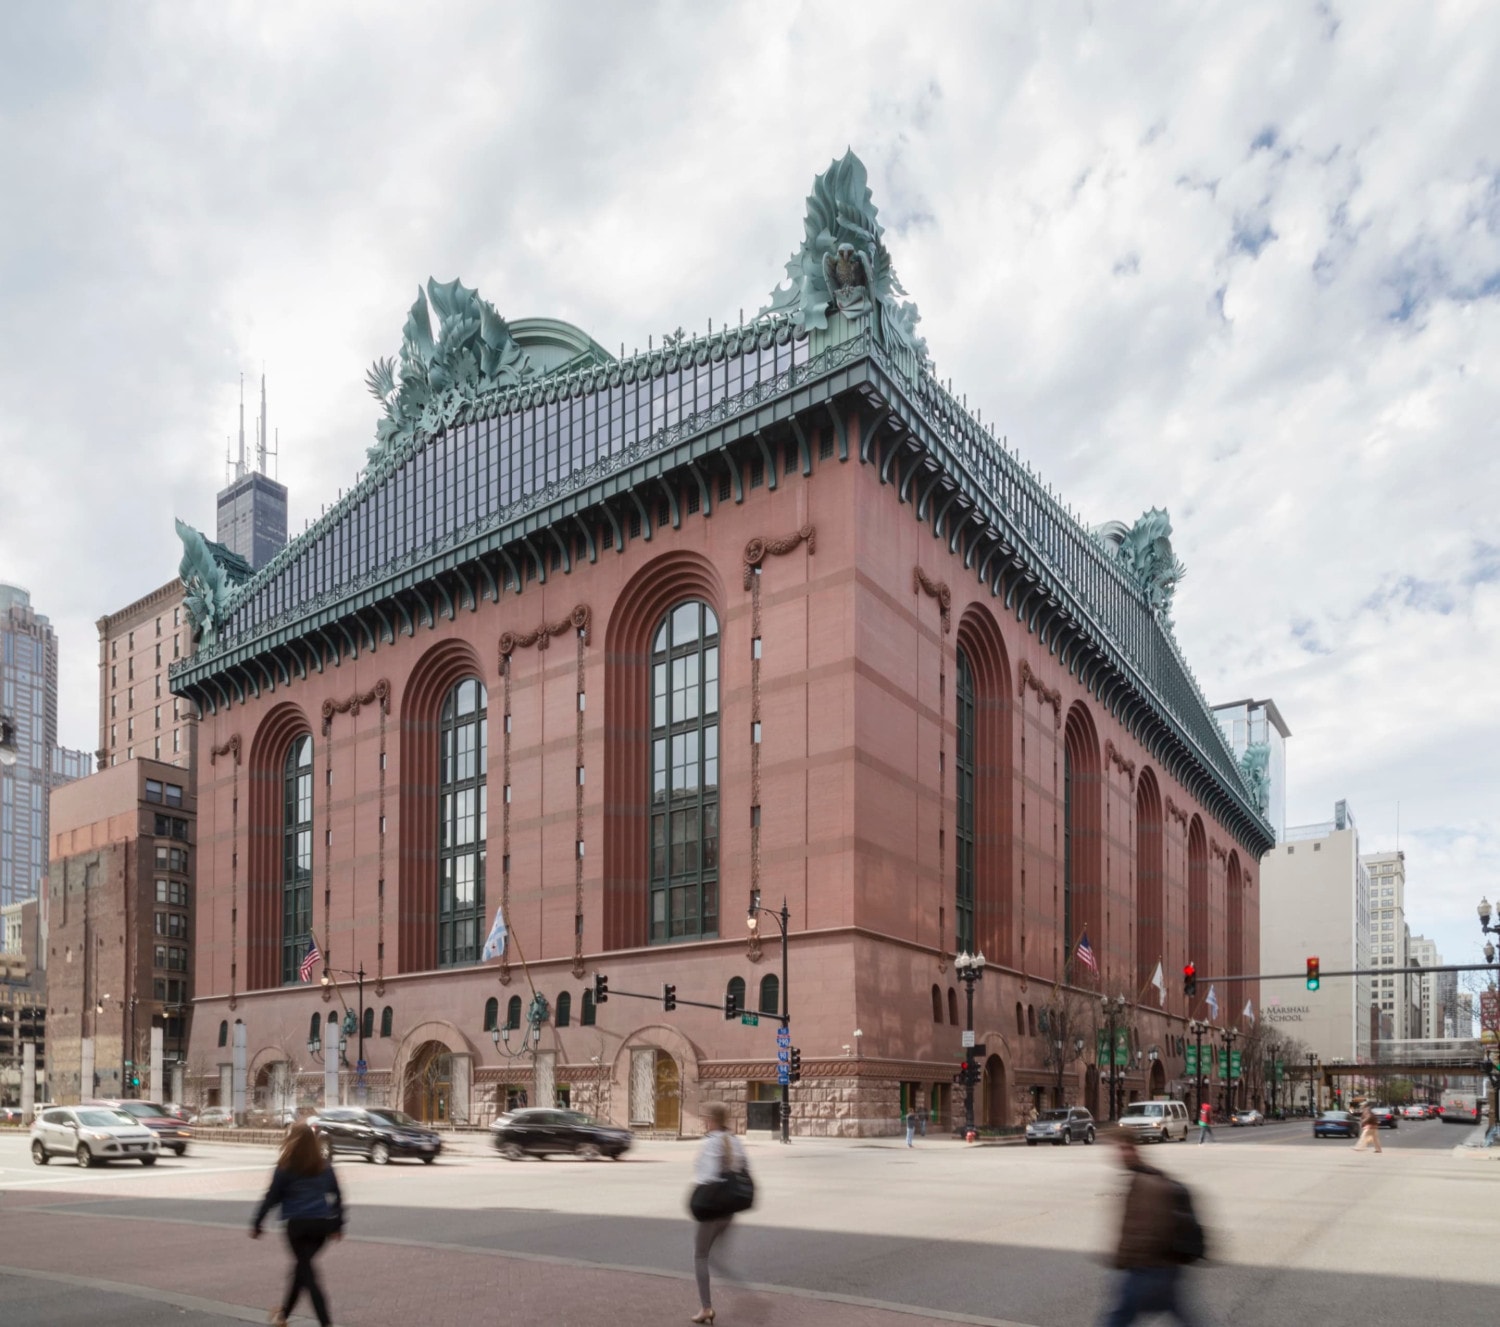 Harold Washington Library photographed in 2015, twenty-five years after manufacturing.